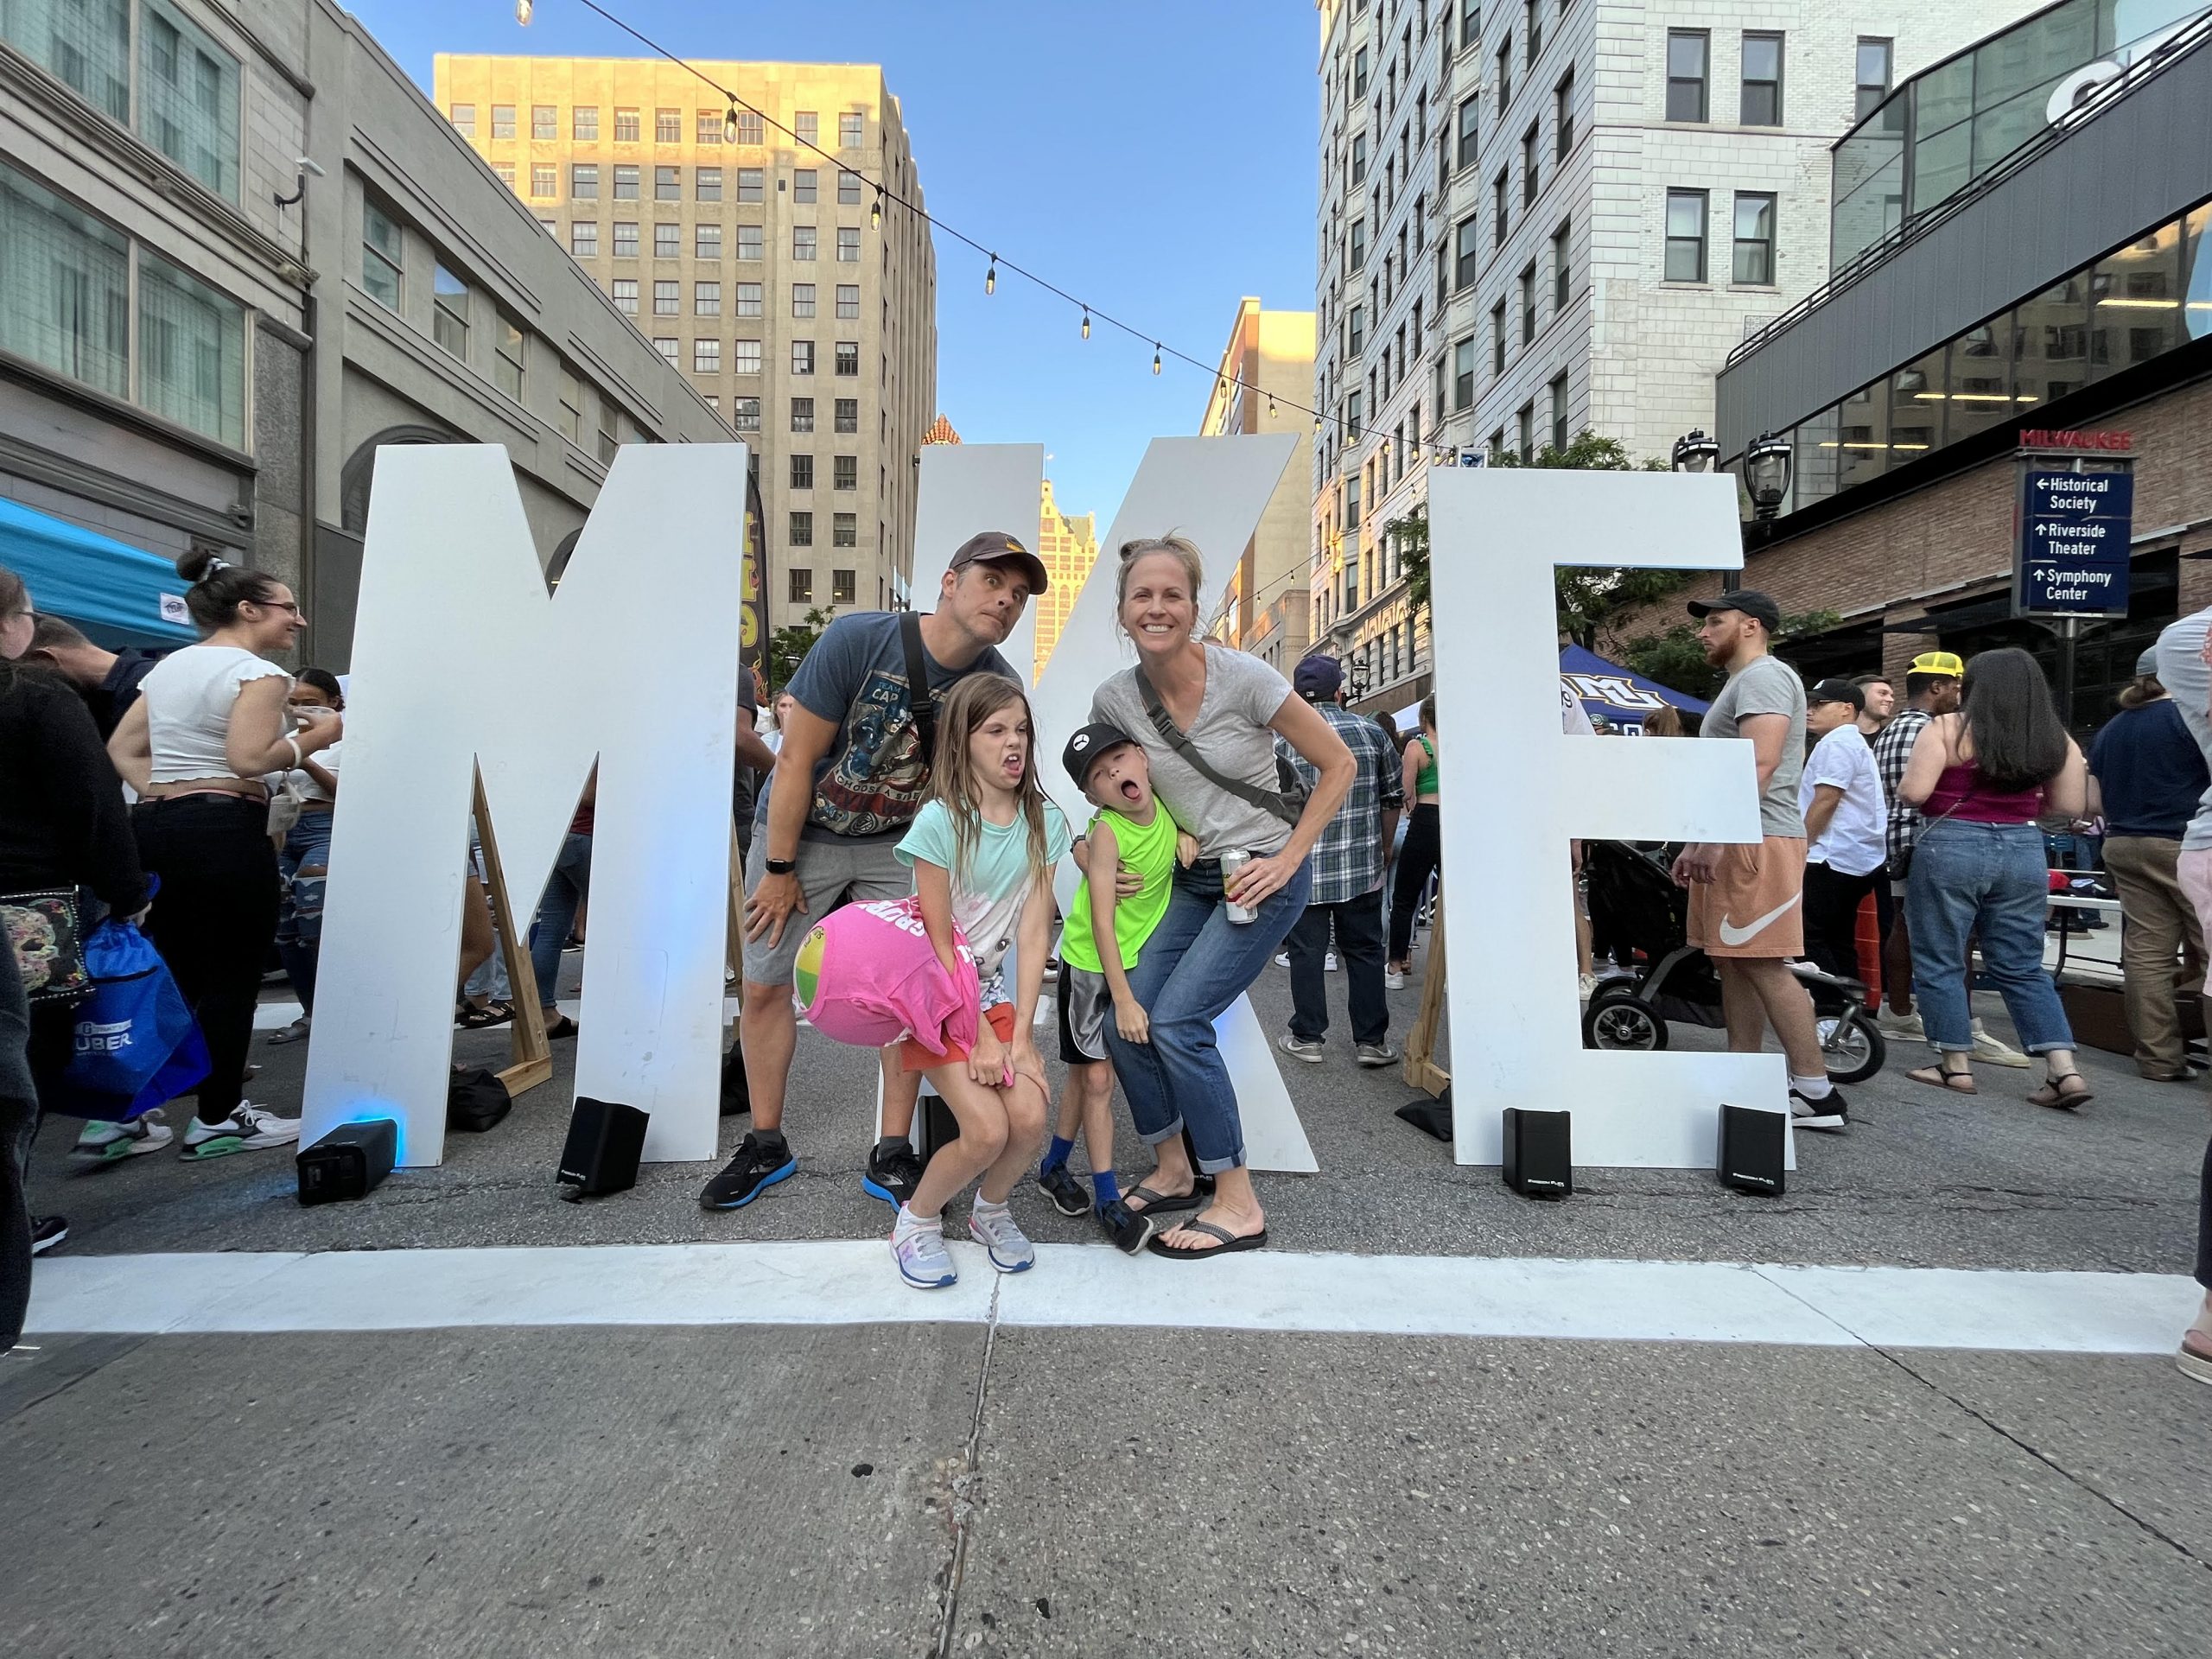 Family of 4 in front of a MKE sign in Milwaukee, WI